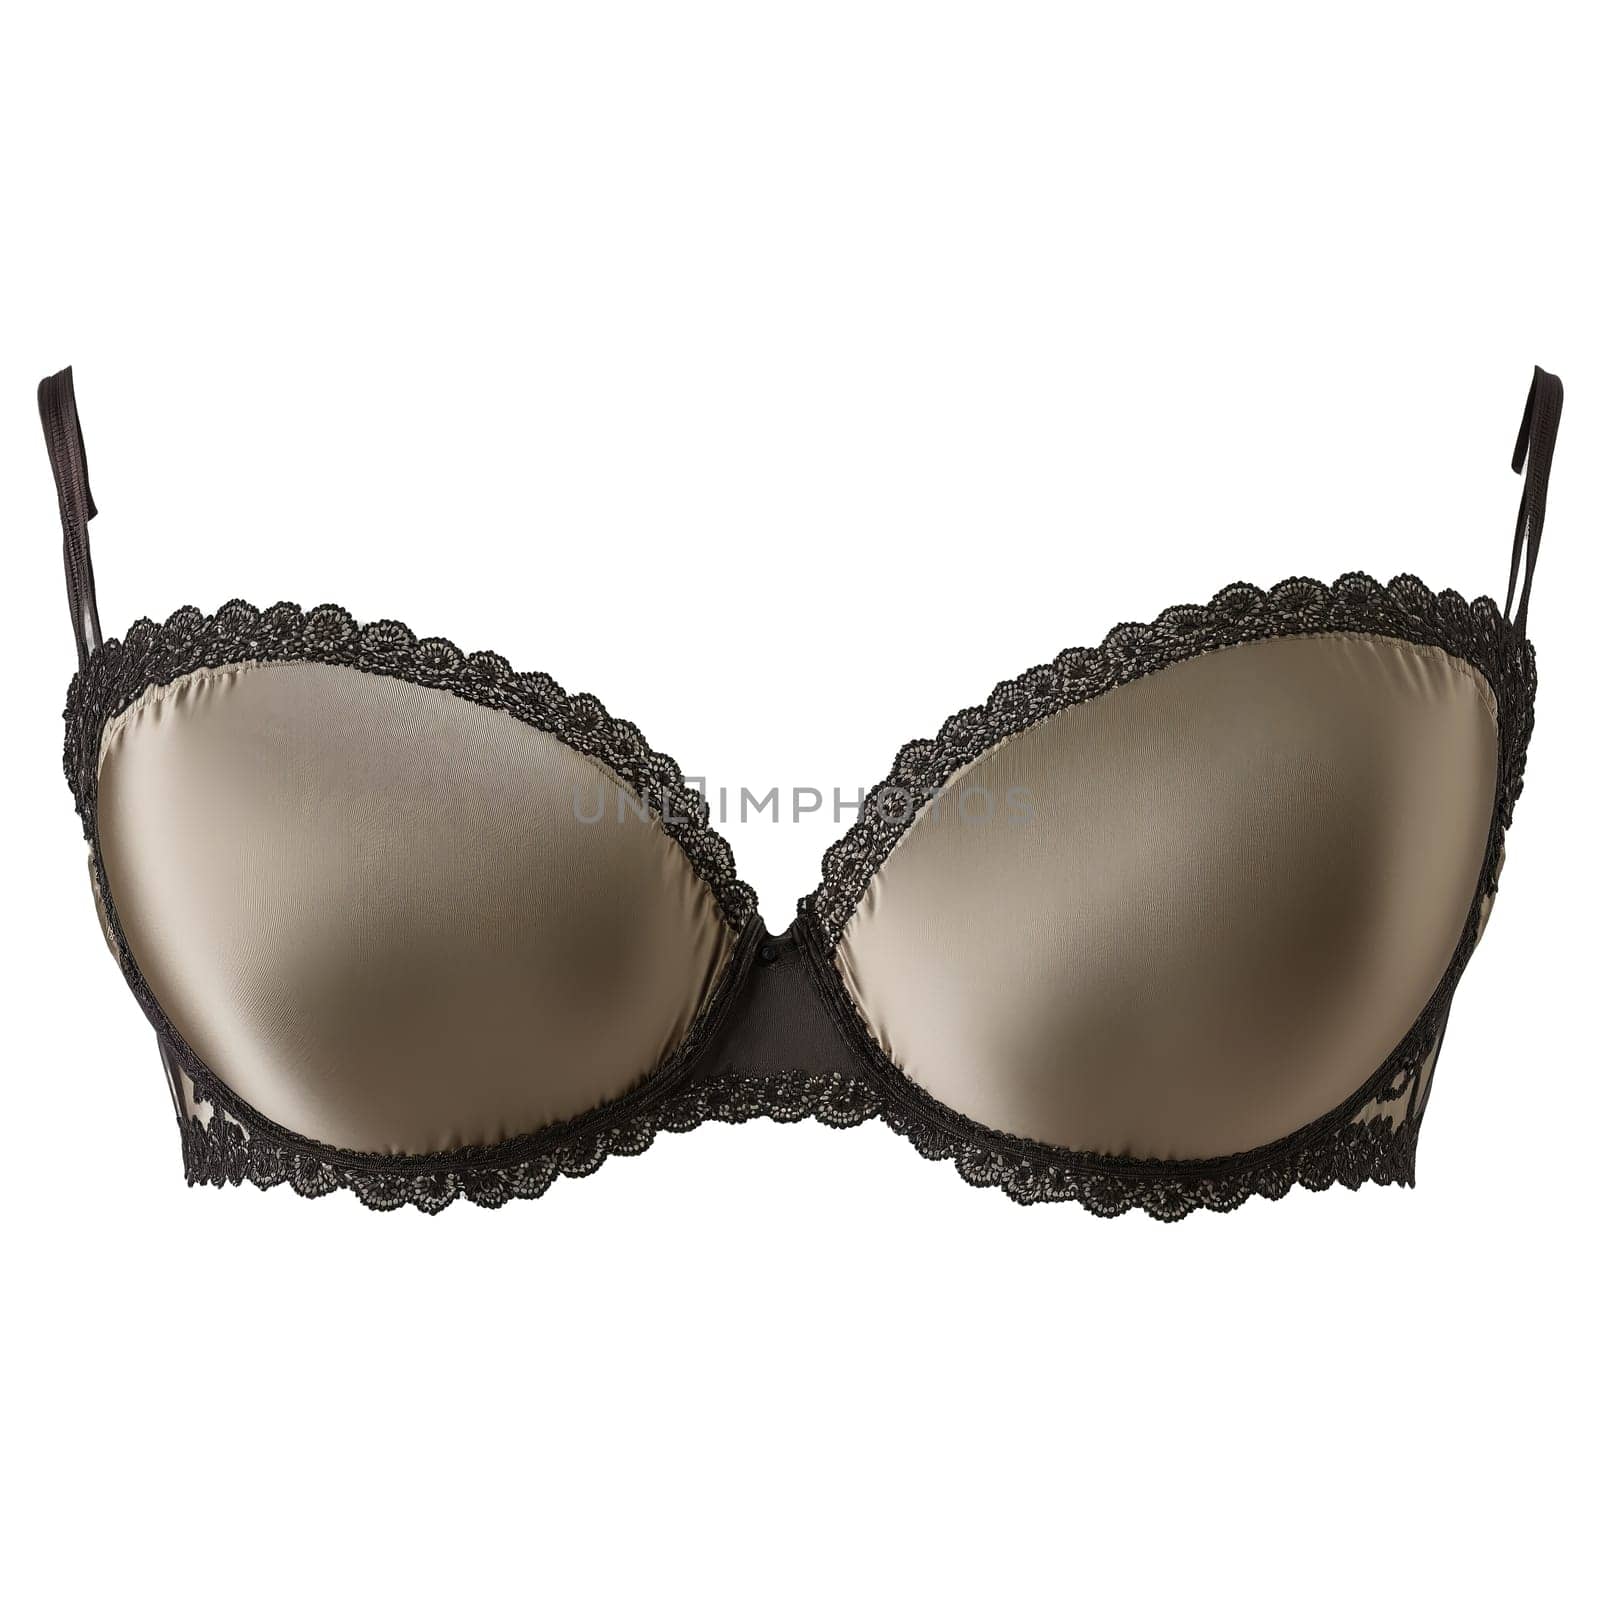 Sophisticated Taupe Silk Bra A sophisticated taupe silk bra with a neutral elegant color showcasing by panophotograph